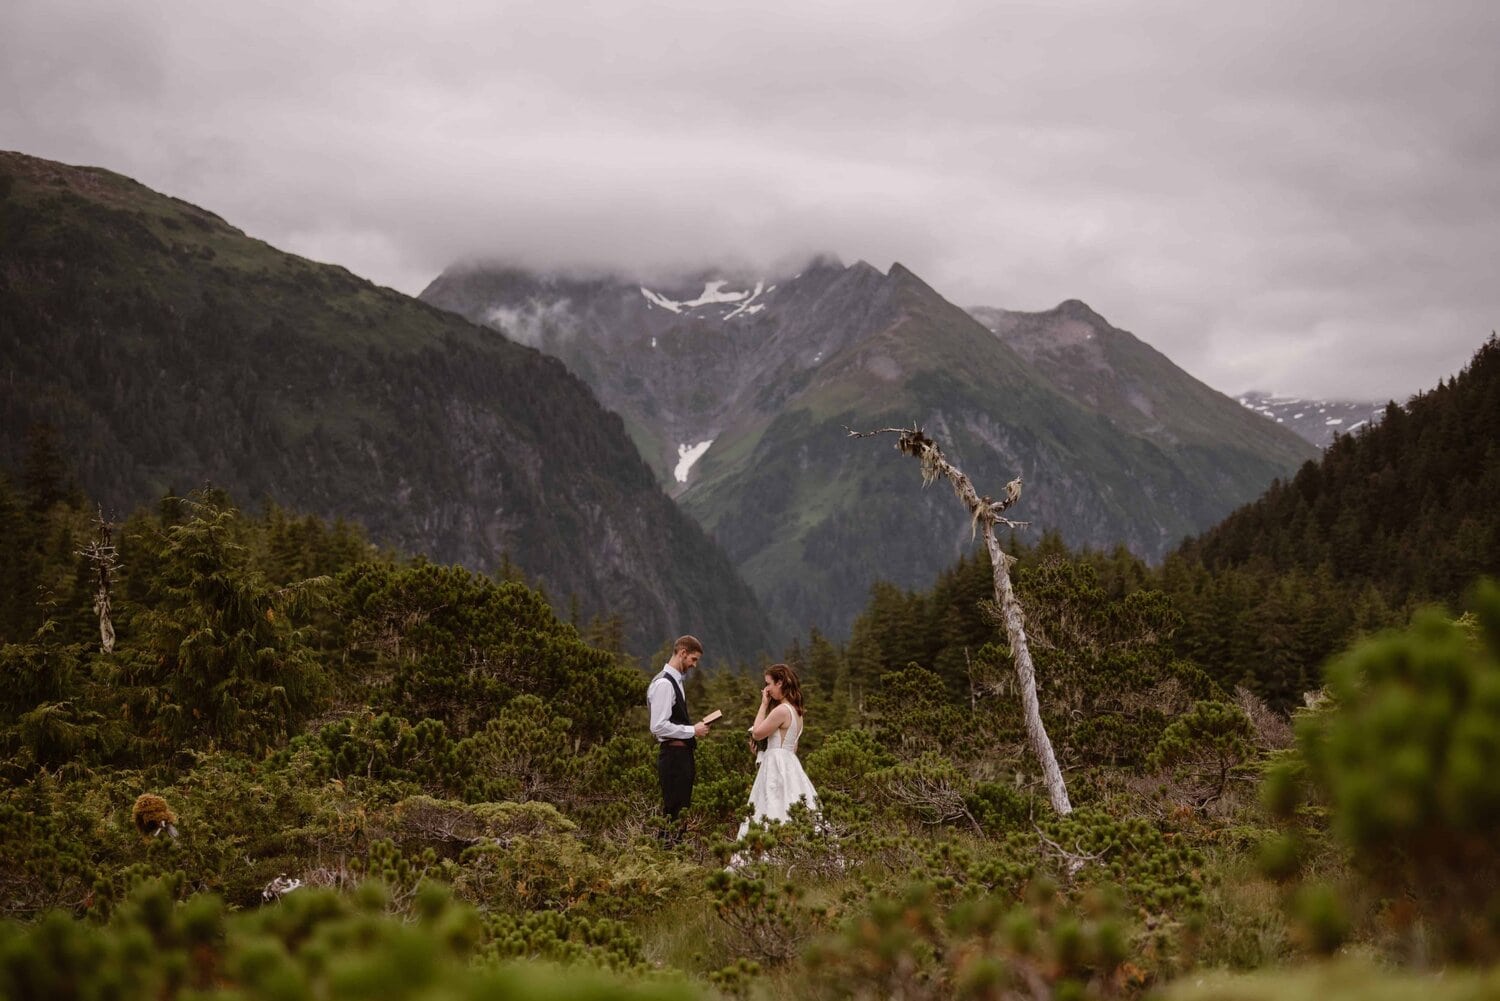 Groom reads vows to bride in the mountains.